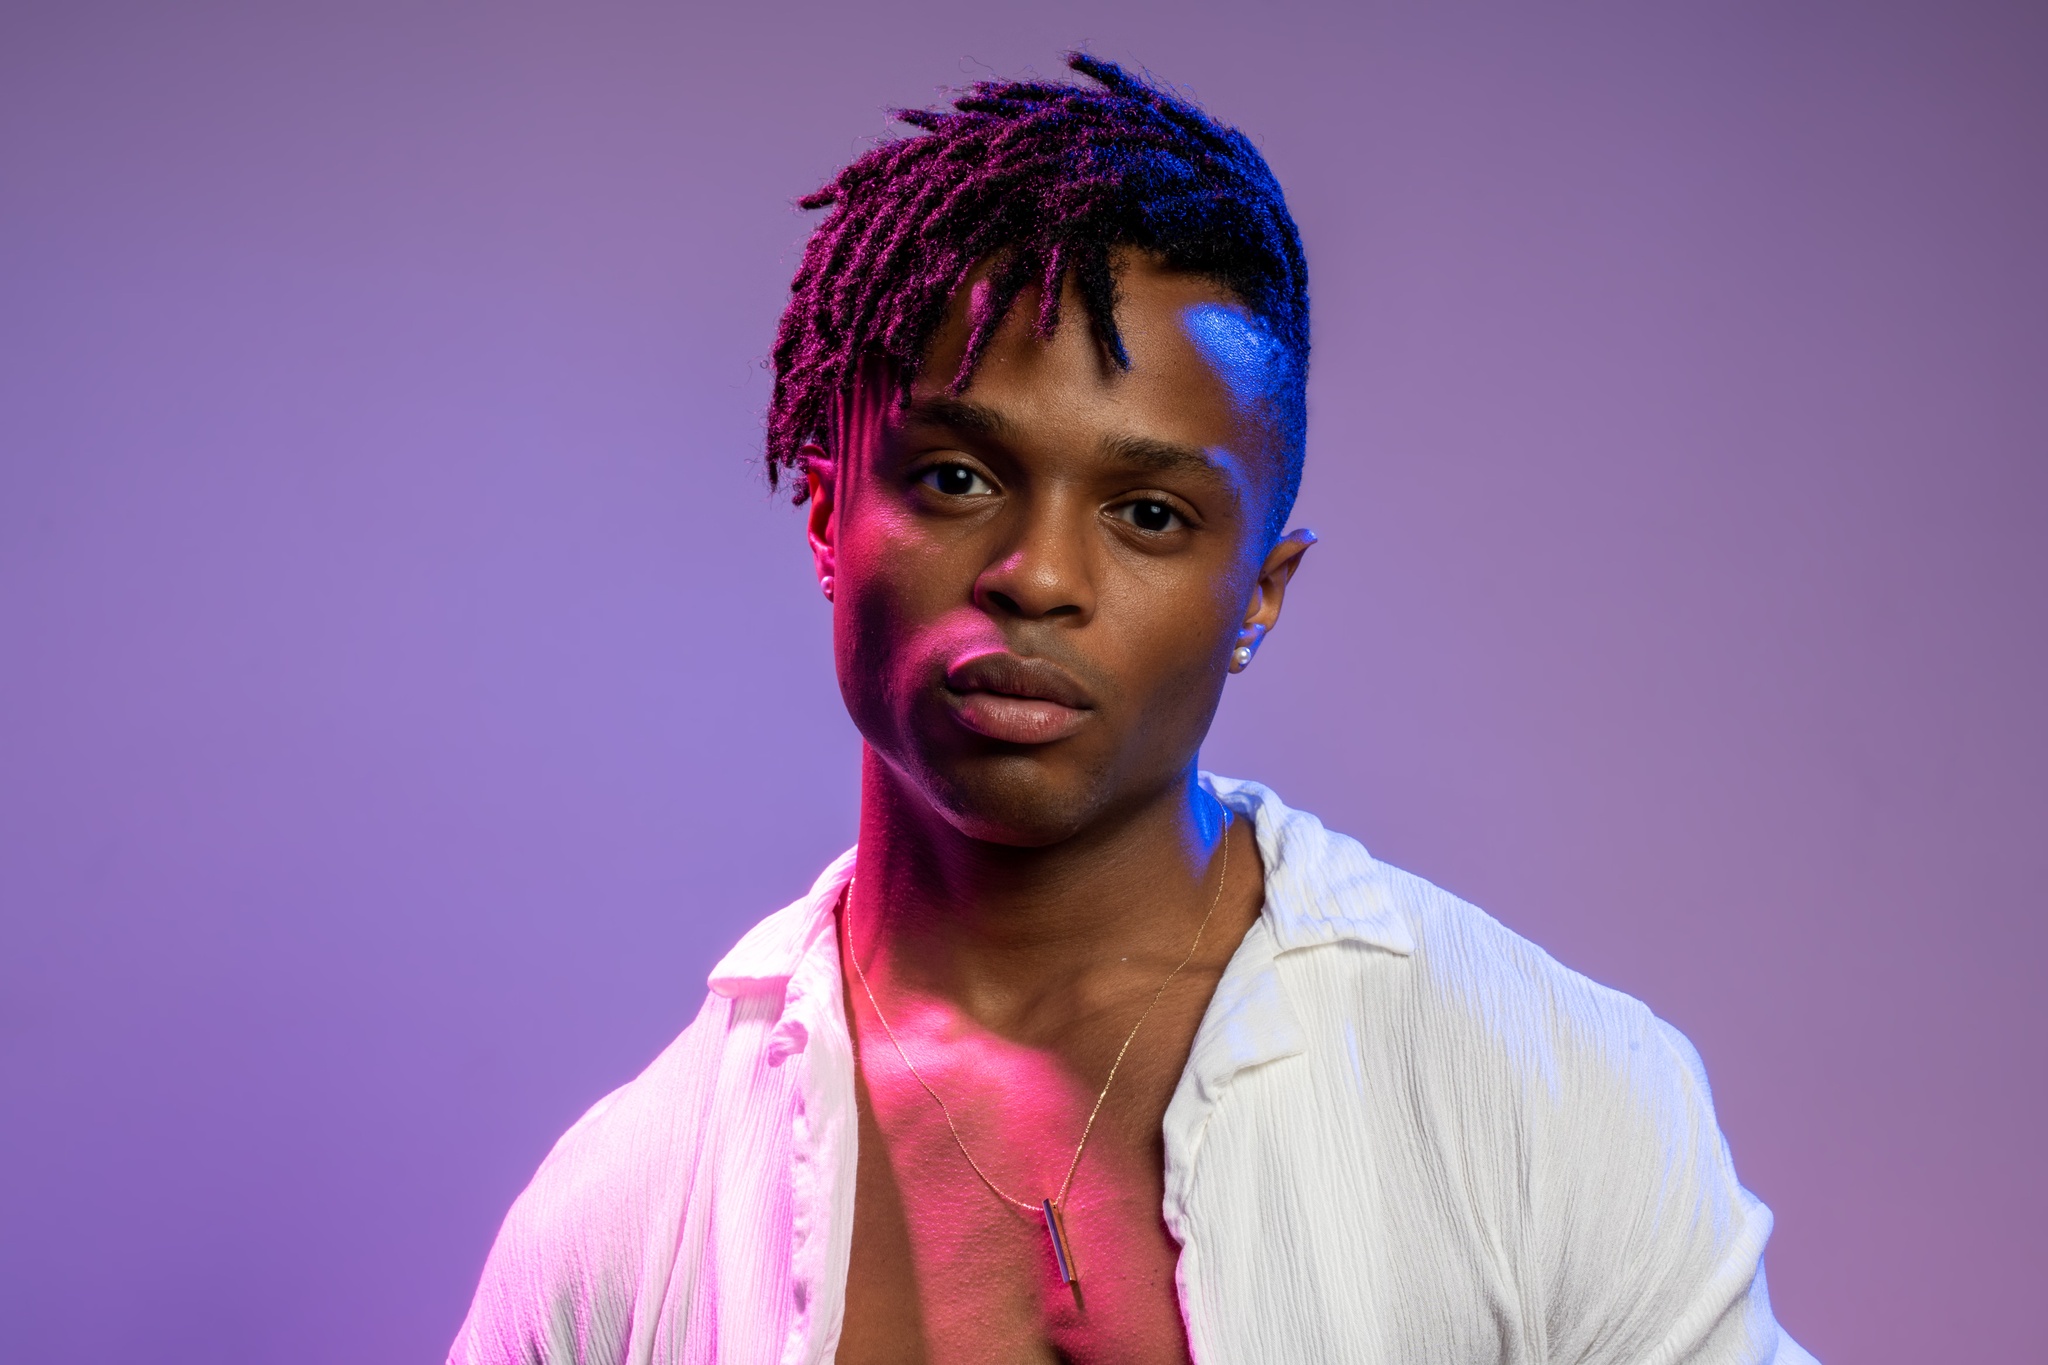 Artist John-Michael Lyles looks directly at us in a portrait where we see him from the chest up. He is a black man with short locs falling over his forehead. He wears an unbuttoned white shirt and is cast in dramatic pink and purple light. 